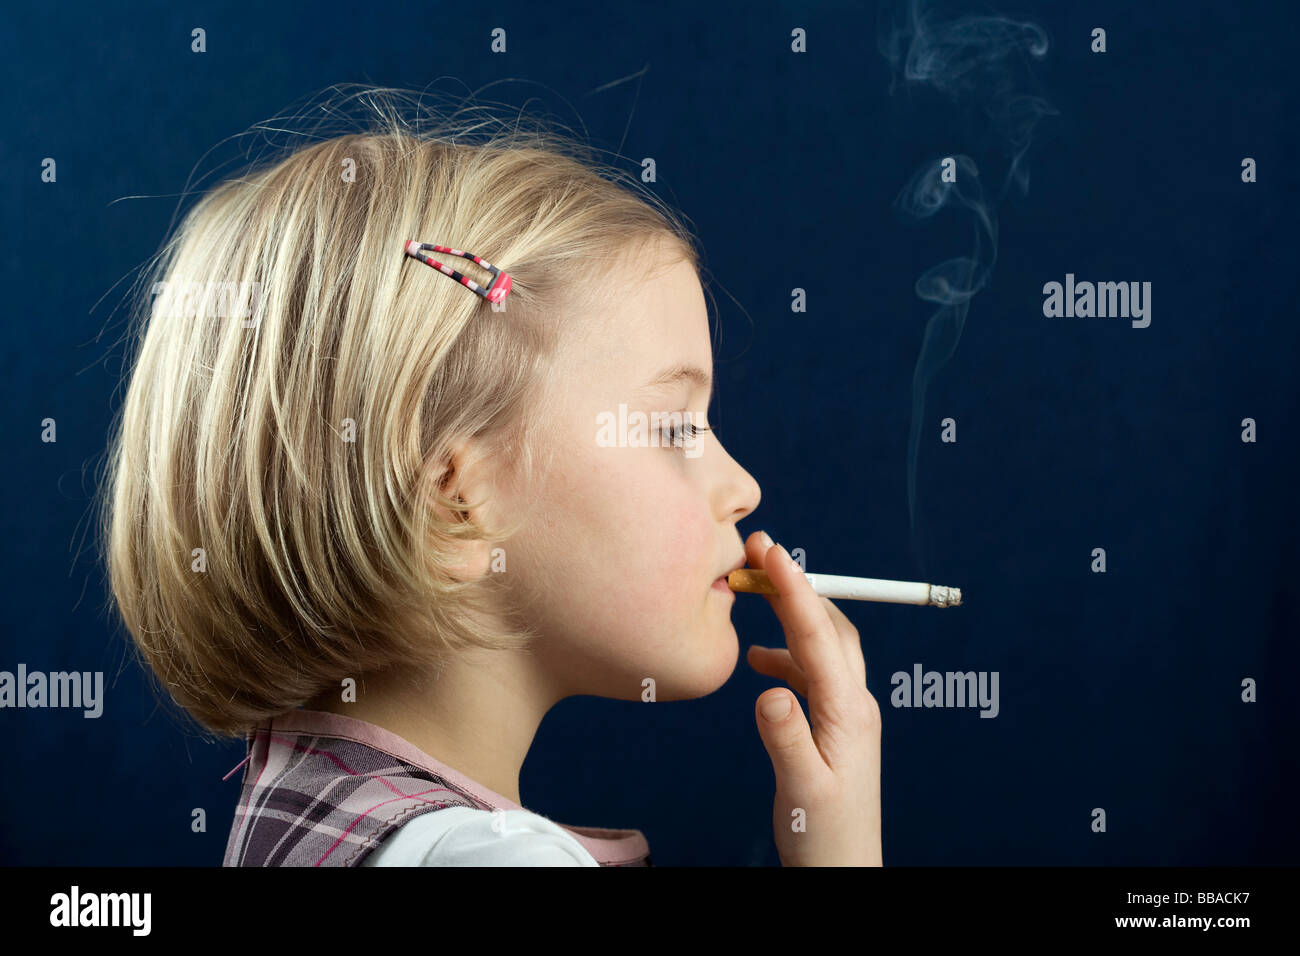 A young girl smoking a cigarette Stock Photo - Alamy